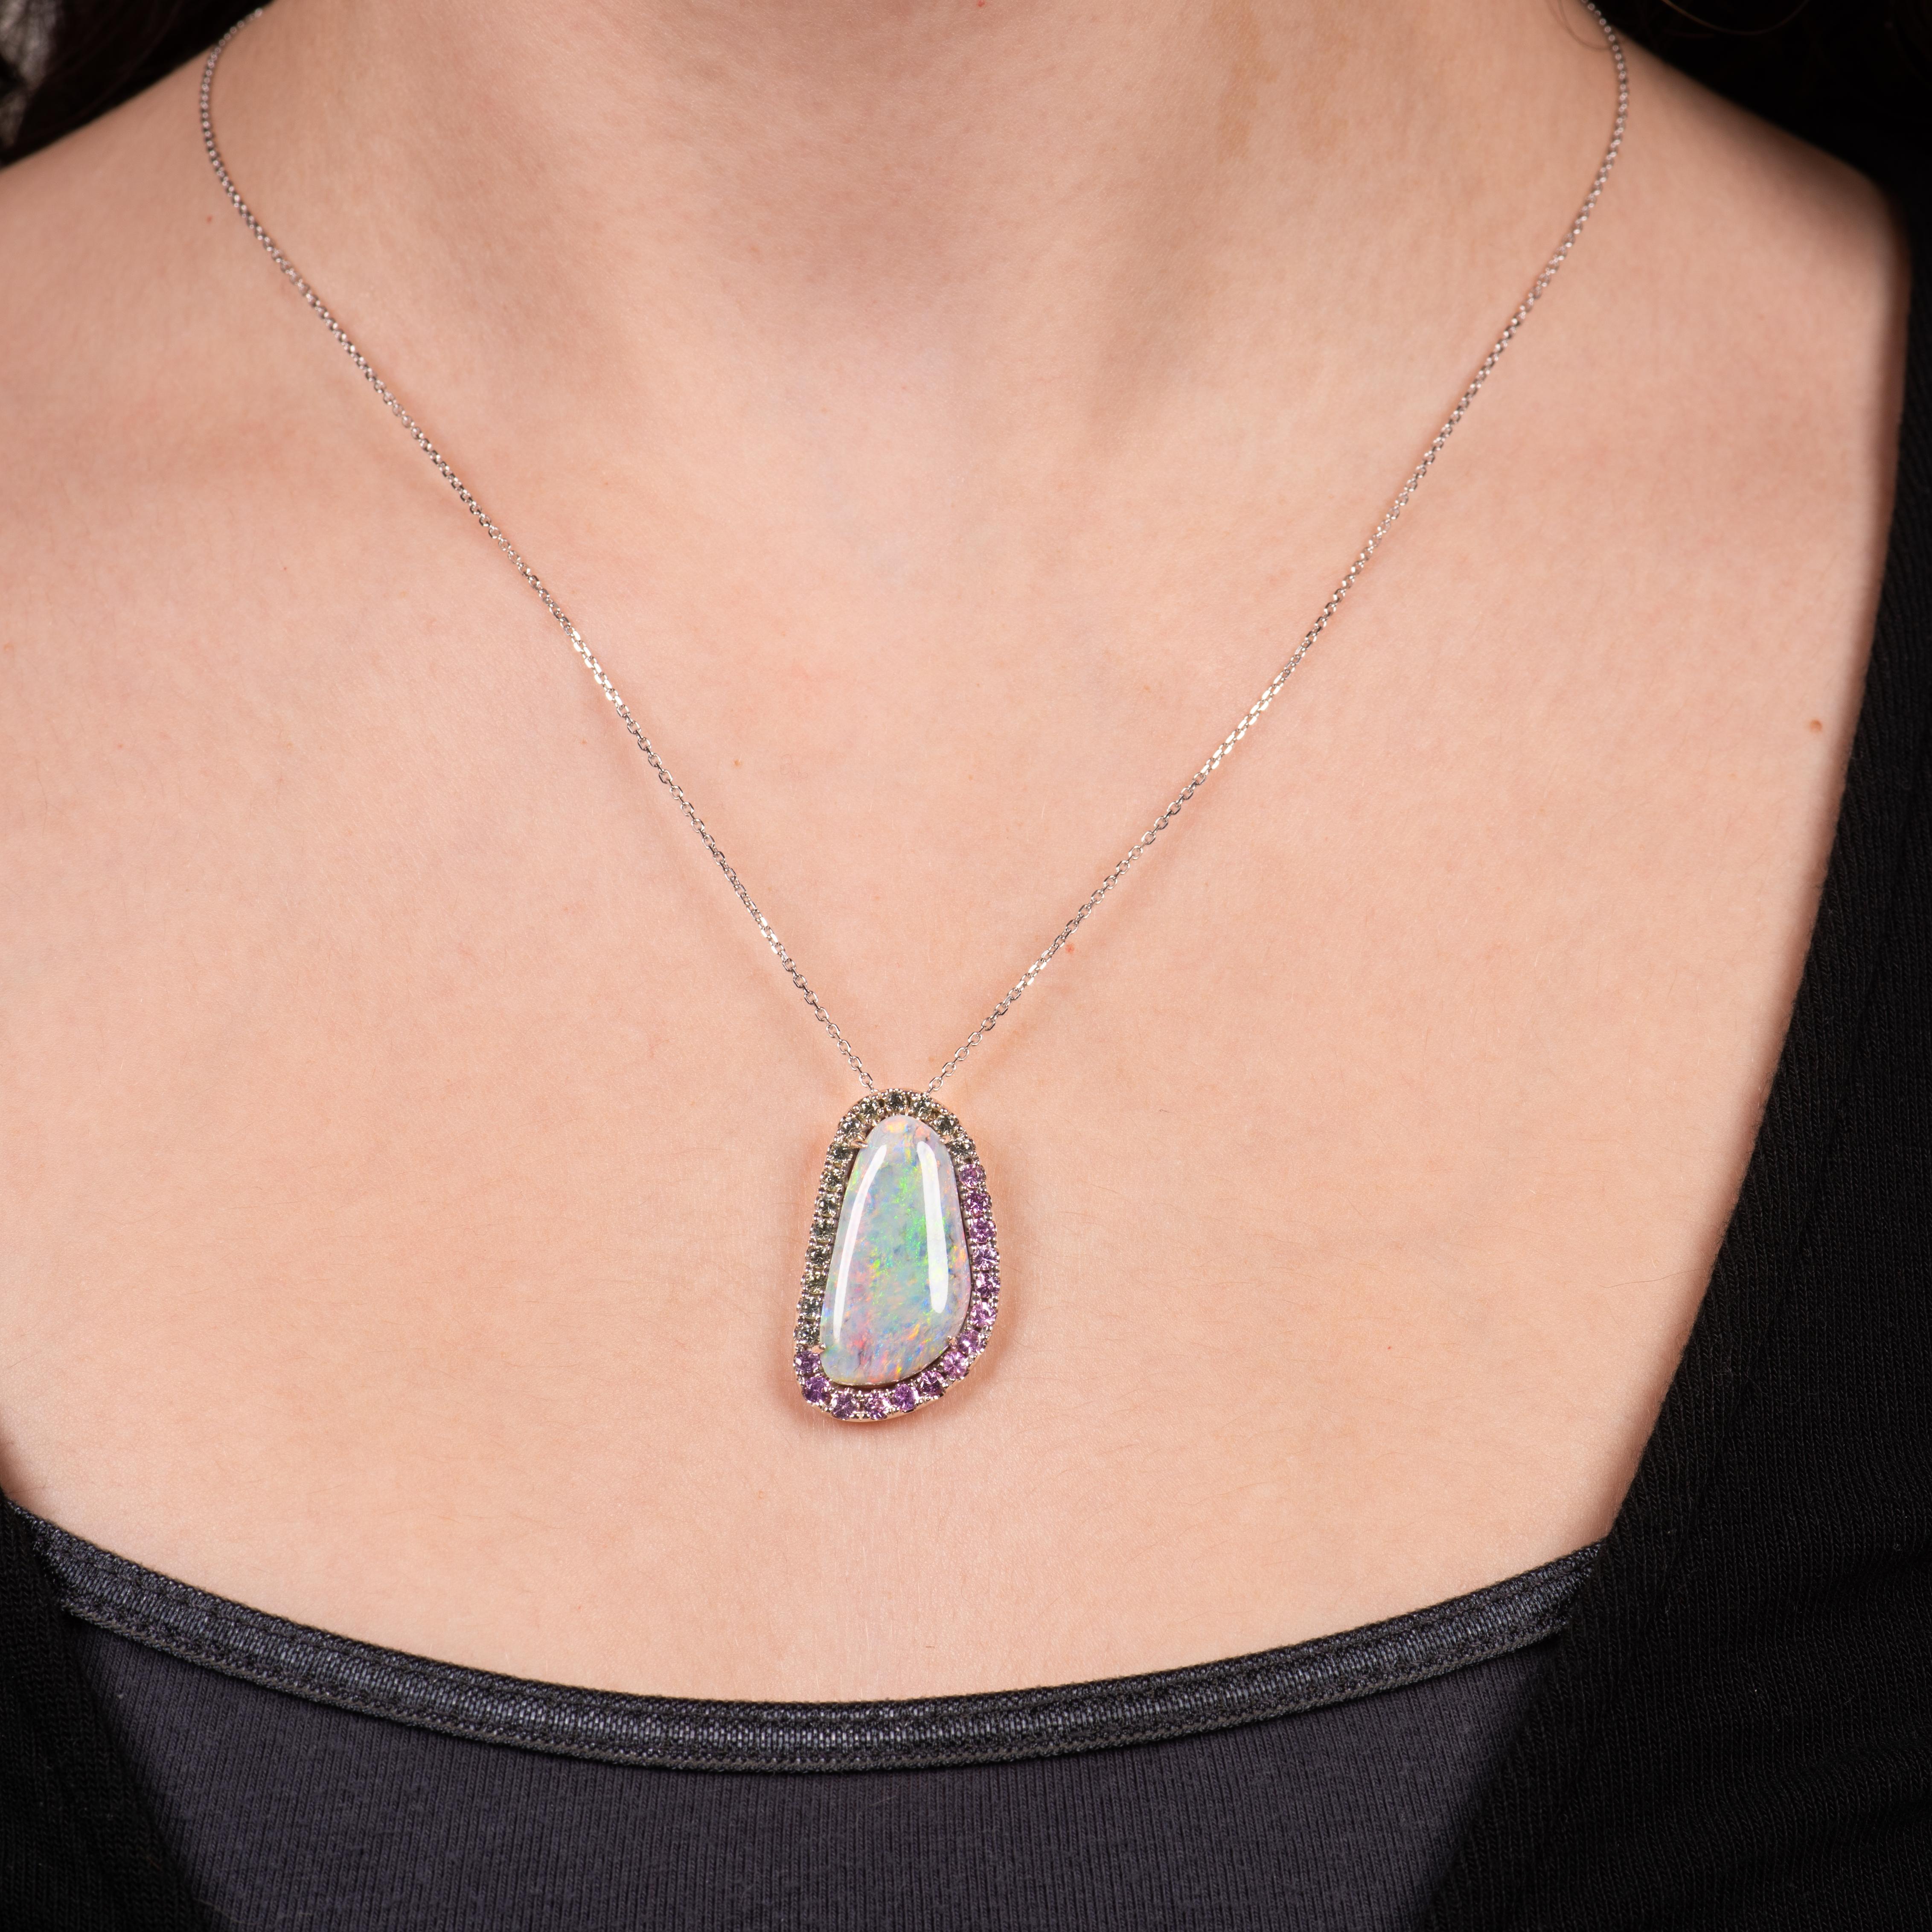 This unique necklace is a 9.45ct Australian grey opal set in 18kt white gold with a halo of 0.60ct total weight round pink sapphires and 0.60ctw in round green sapphires. There is a hidden bail.